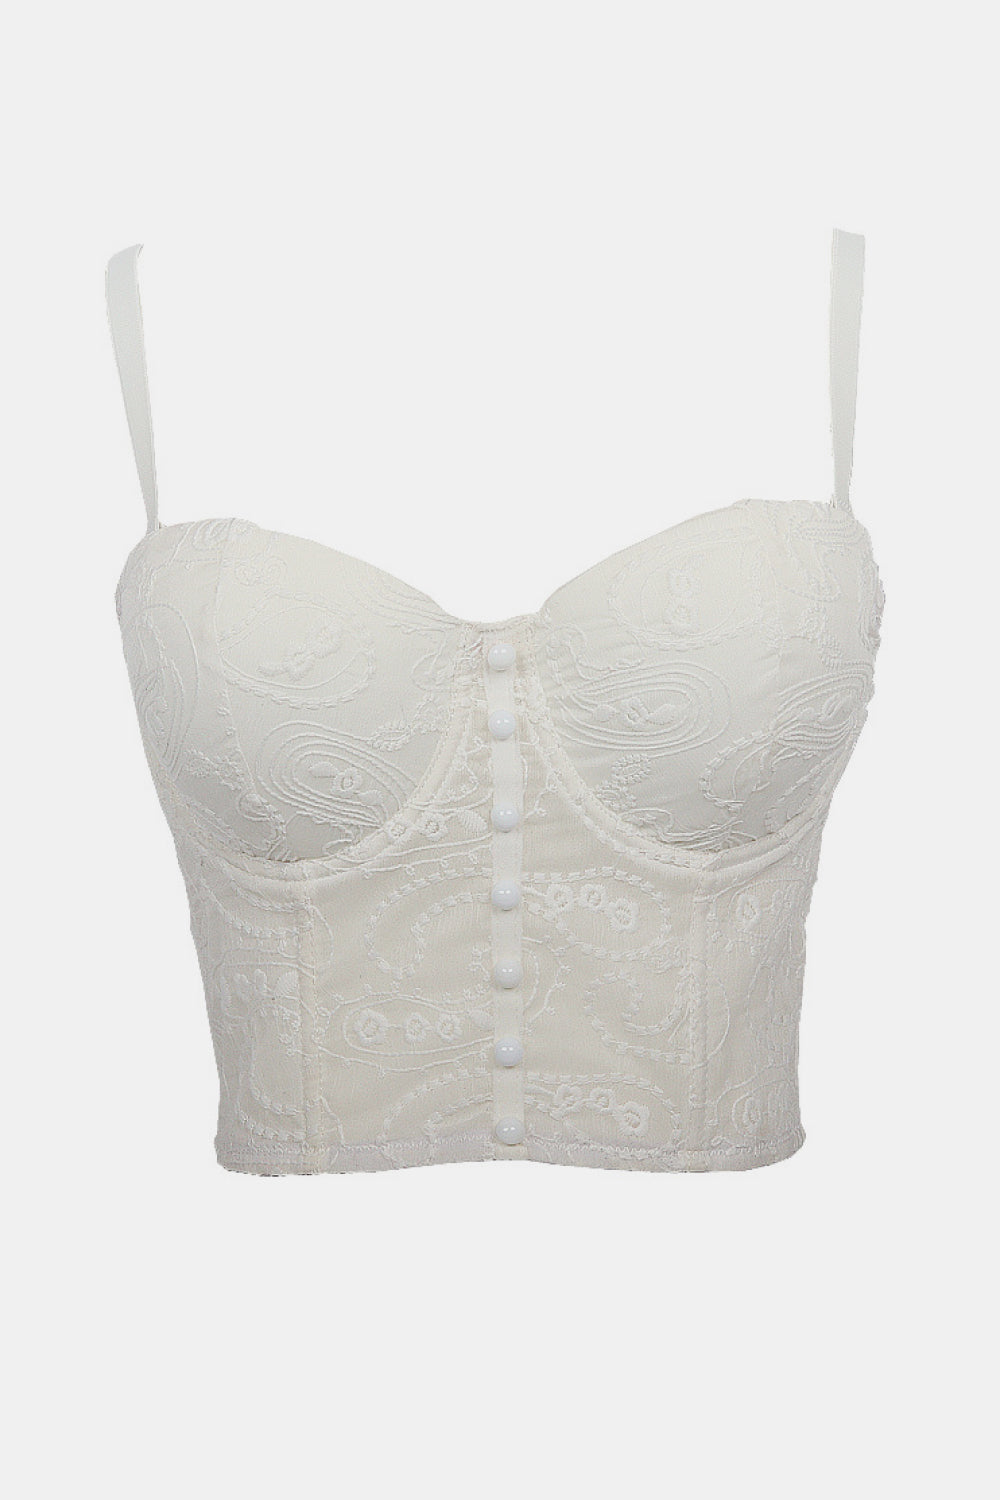 Embroidered Button Front Bustier